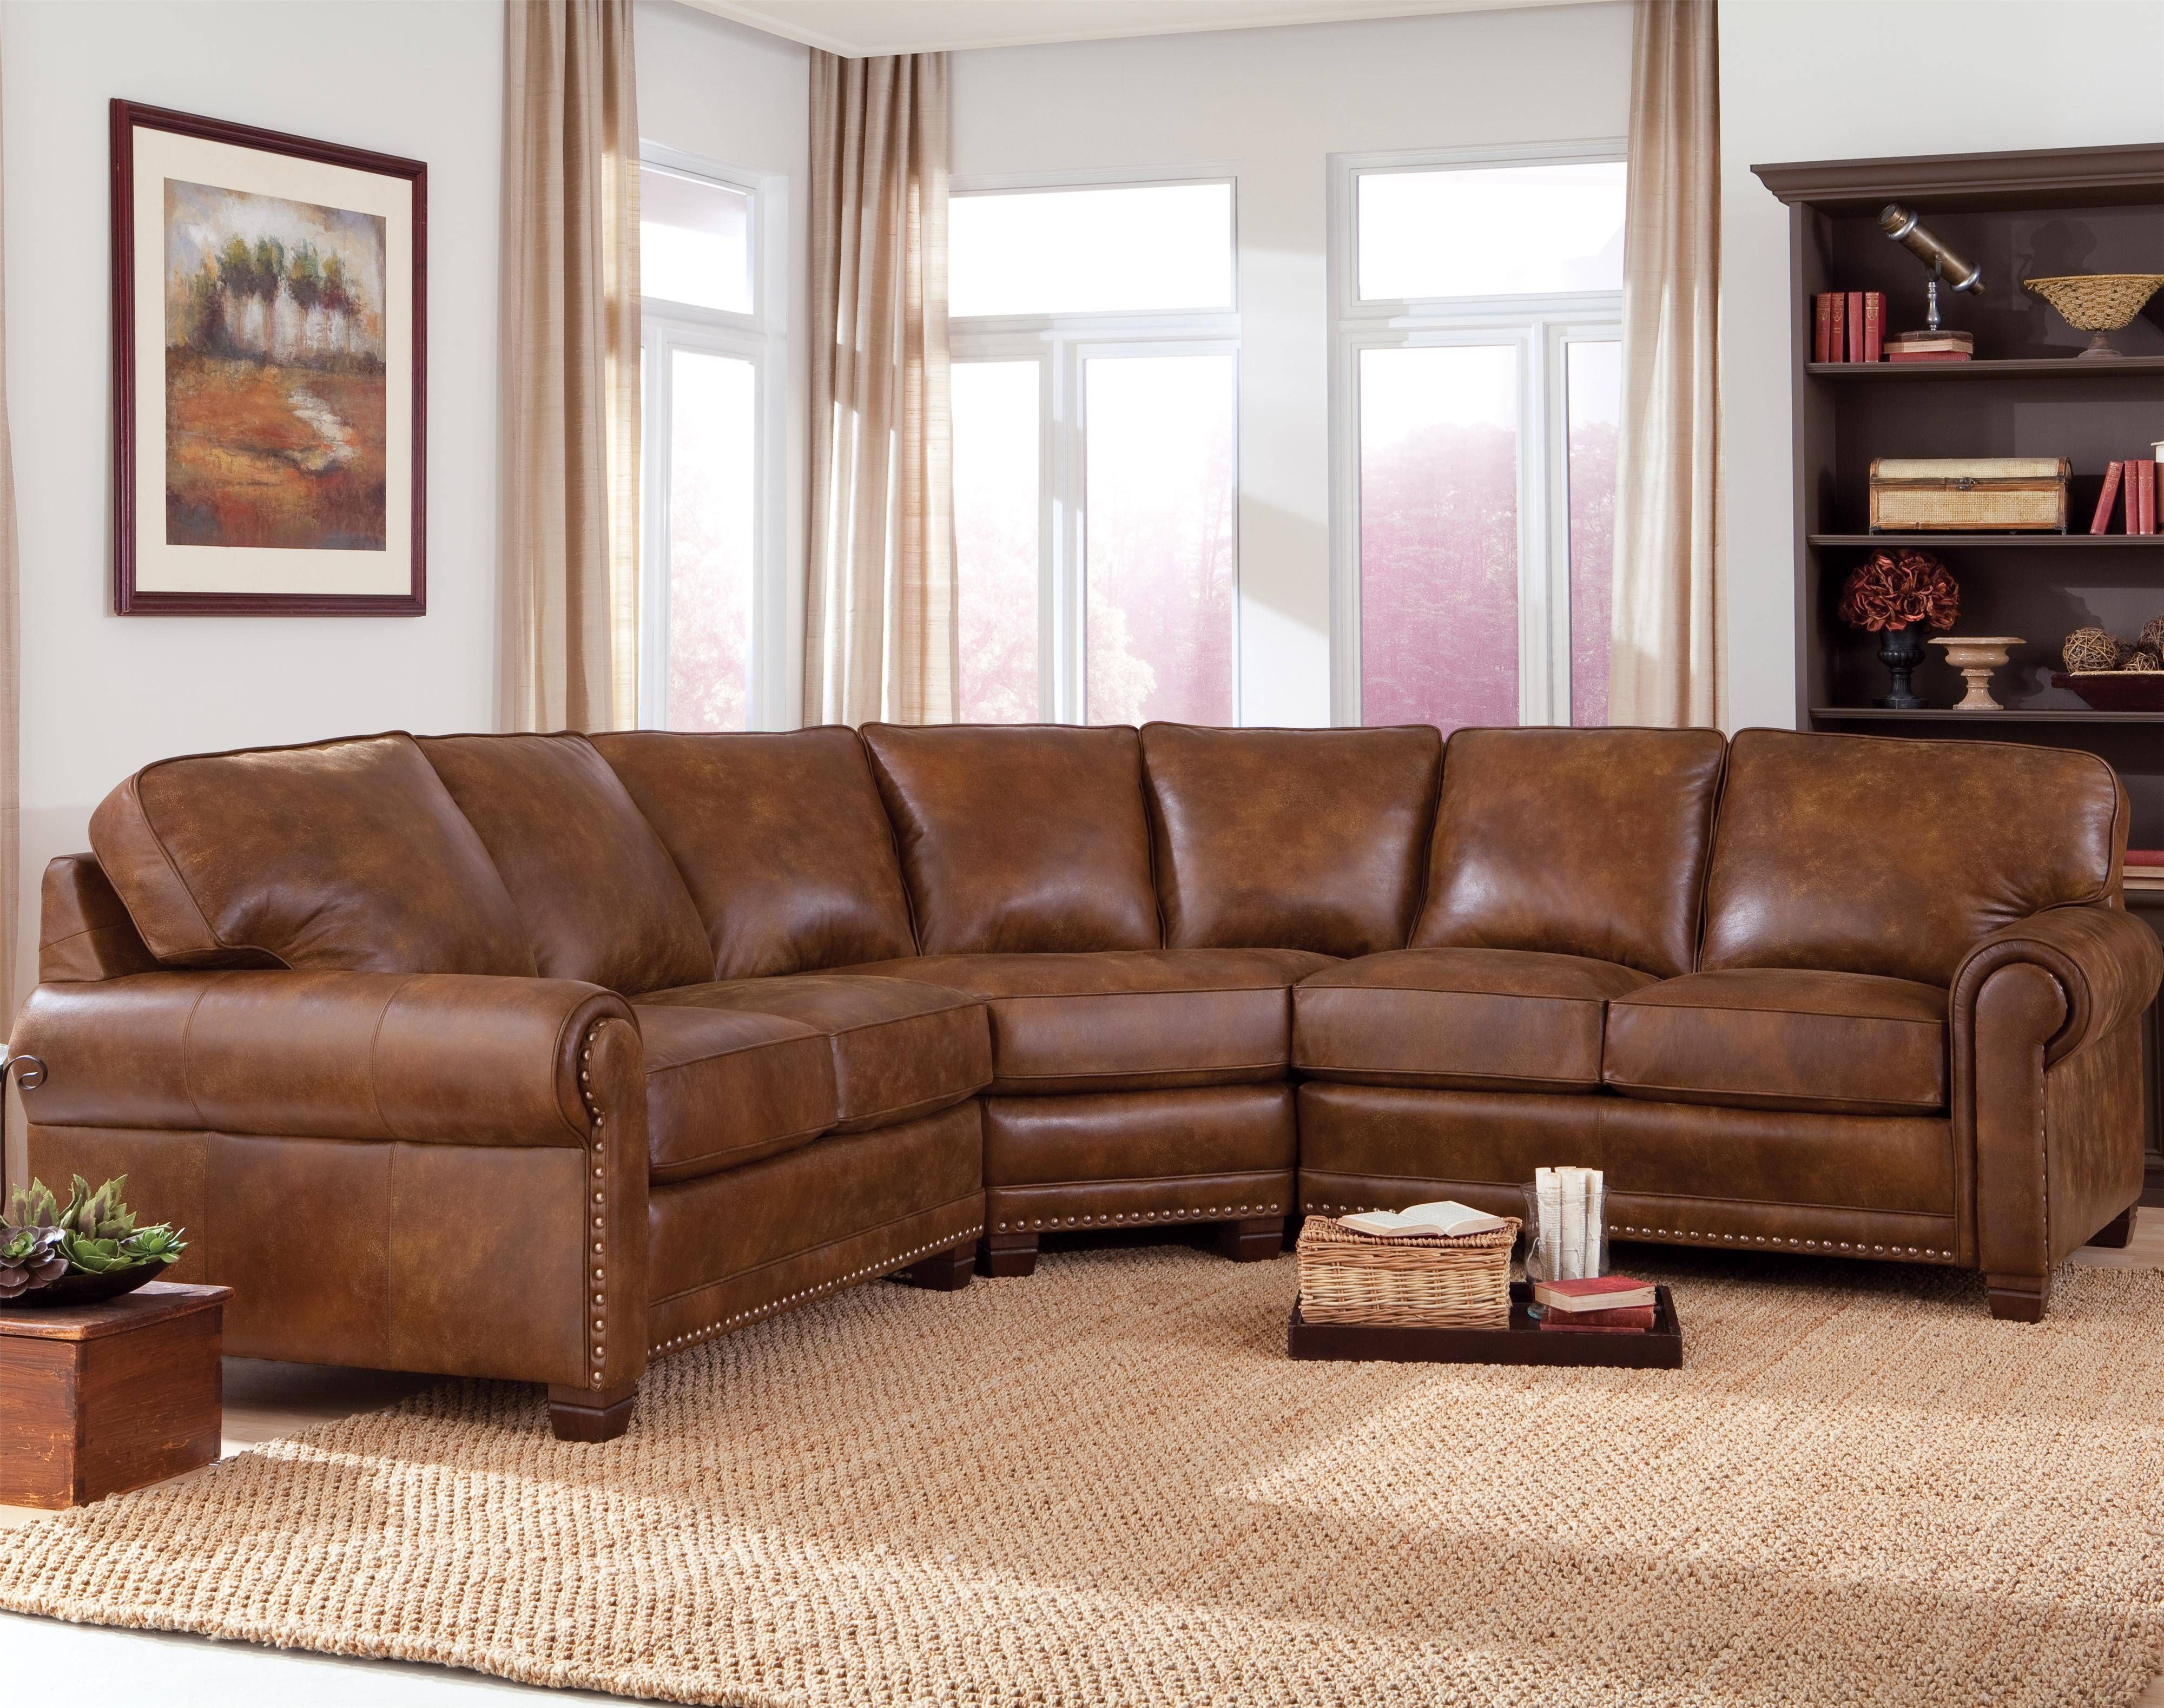 Traditional 3 Piece Sectional Sofa With Nailhead Trimsmith Within Brown Leather Sofas With Nailhead Trim (View 12 of 15)